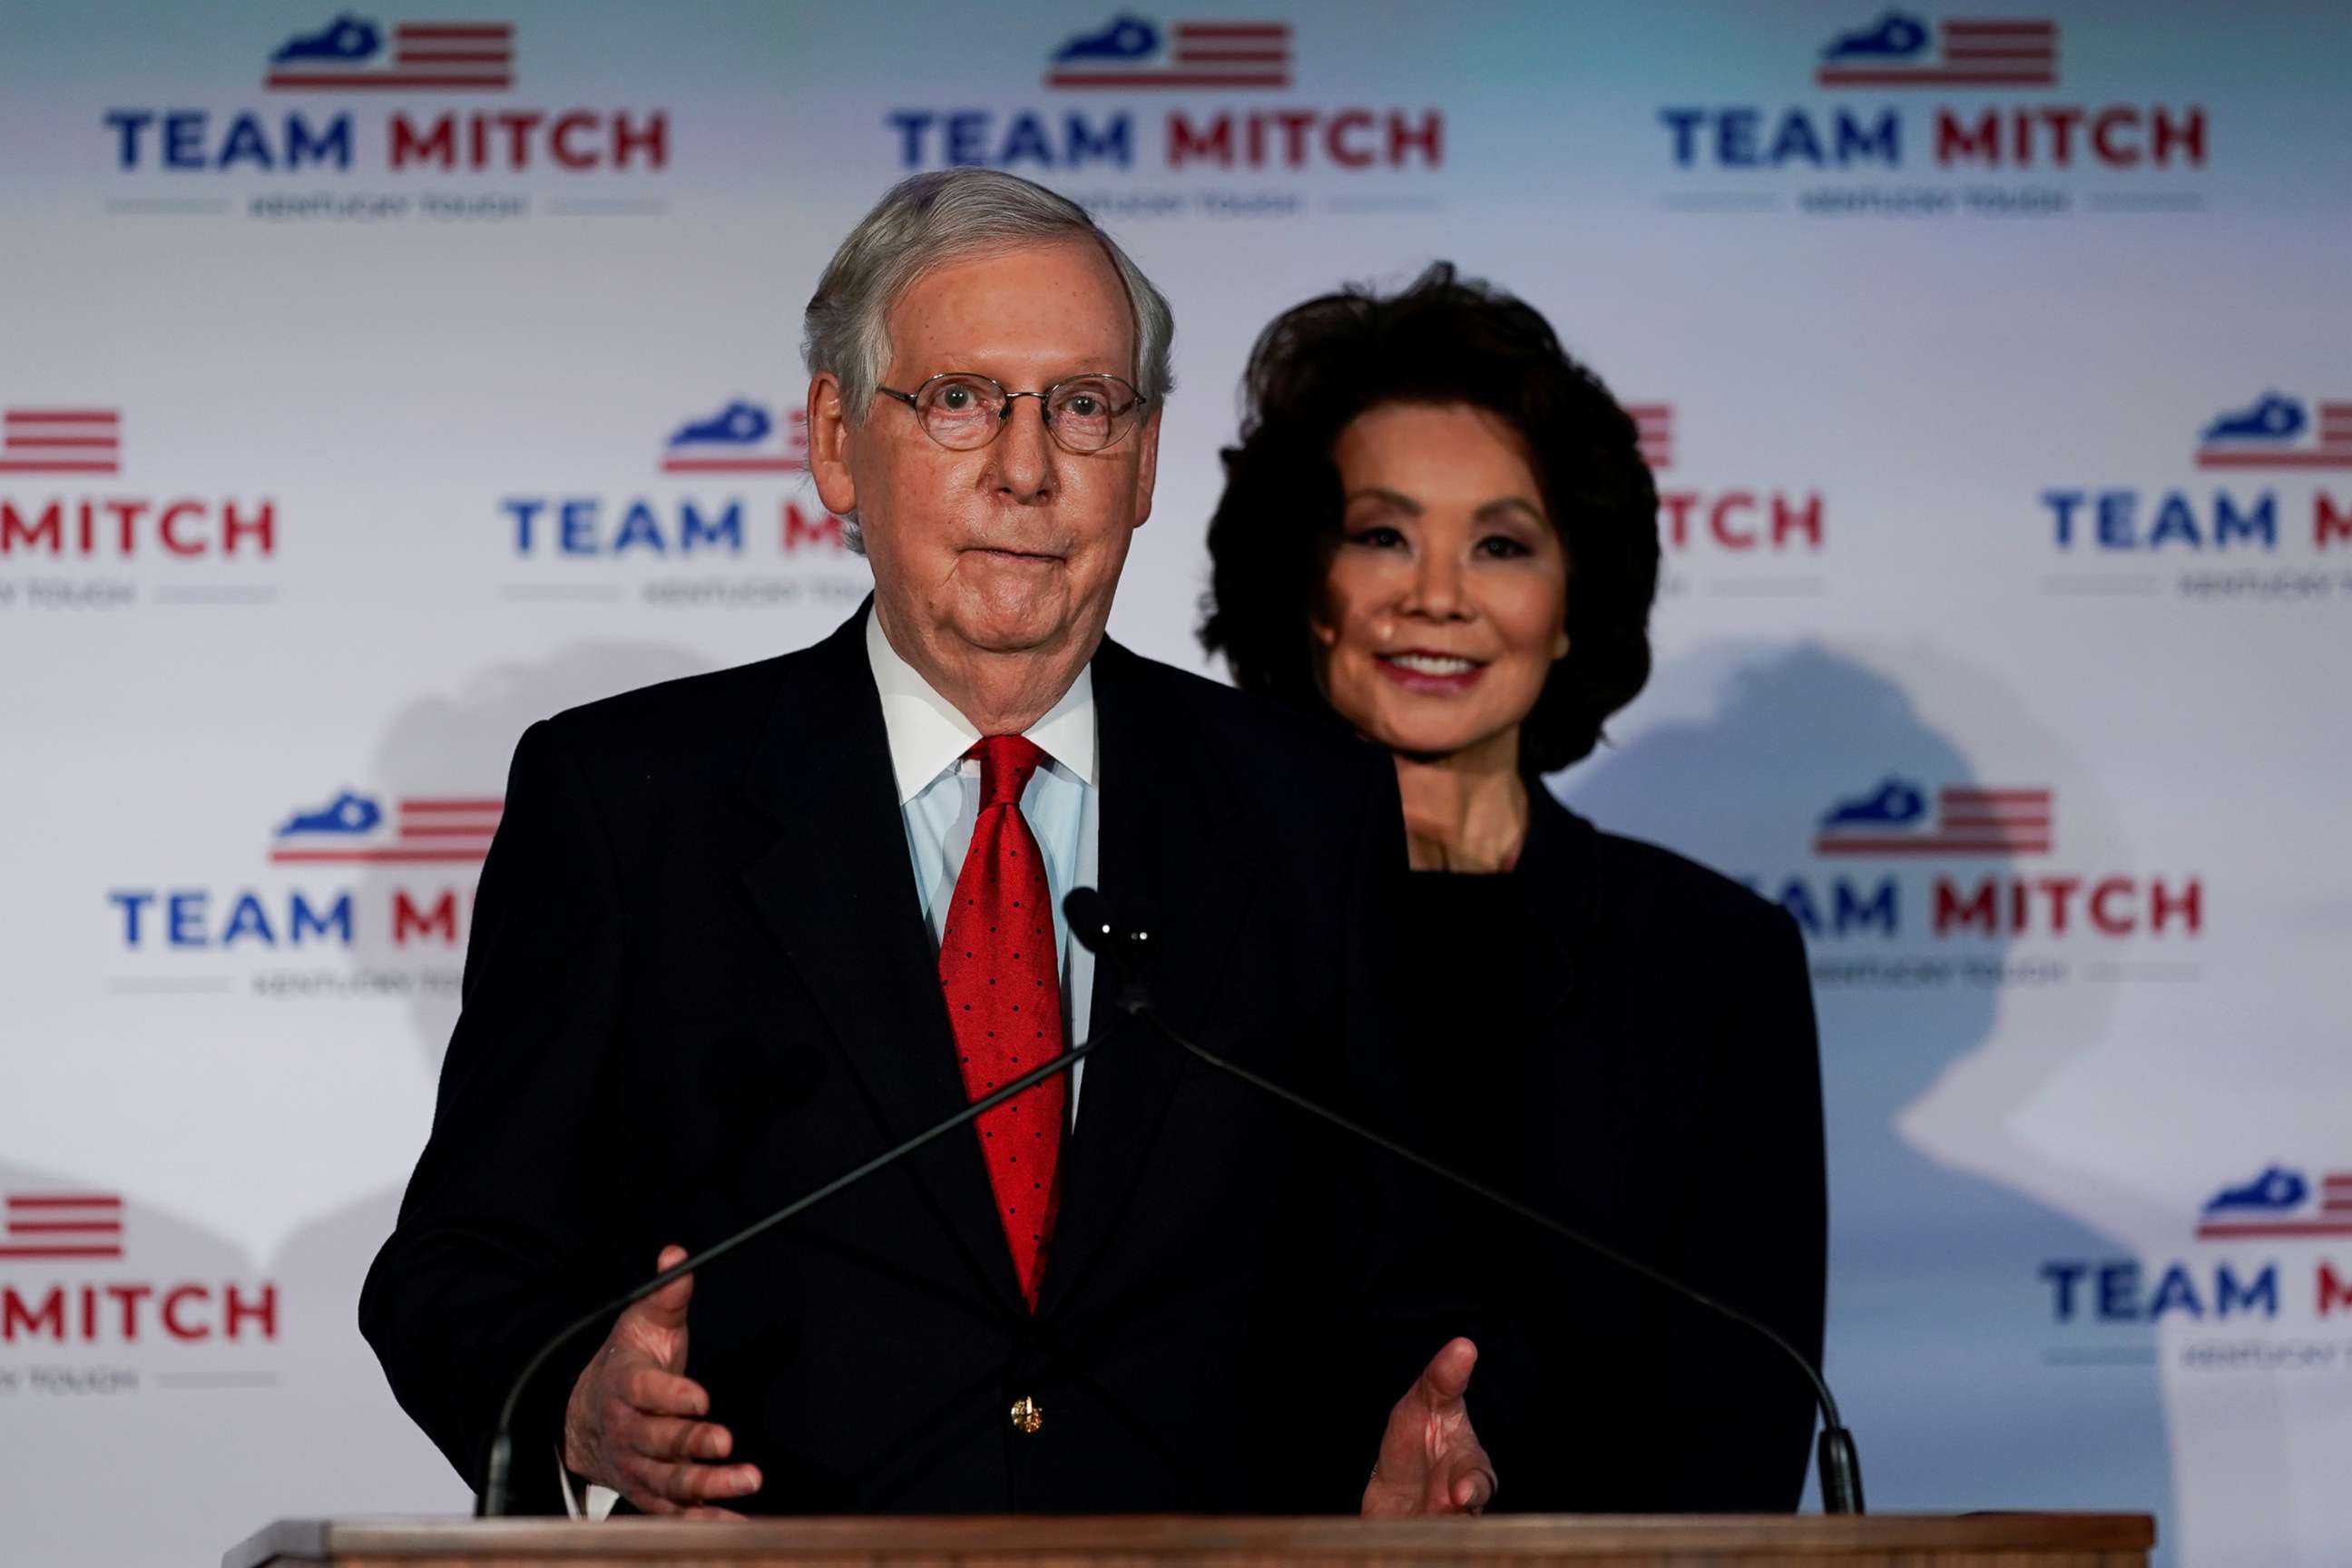 PHOTO: Senate Majority Leader Mitch McConnell, accompanied by his wife, Secretary of Transportation Elaine Chao, holds a post election news conference as he declares victory, in Louisville, Ky., Nov. 3, 2020.